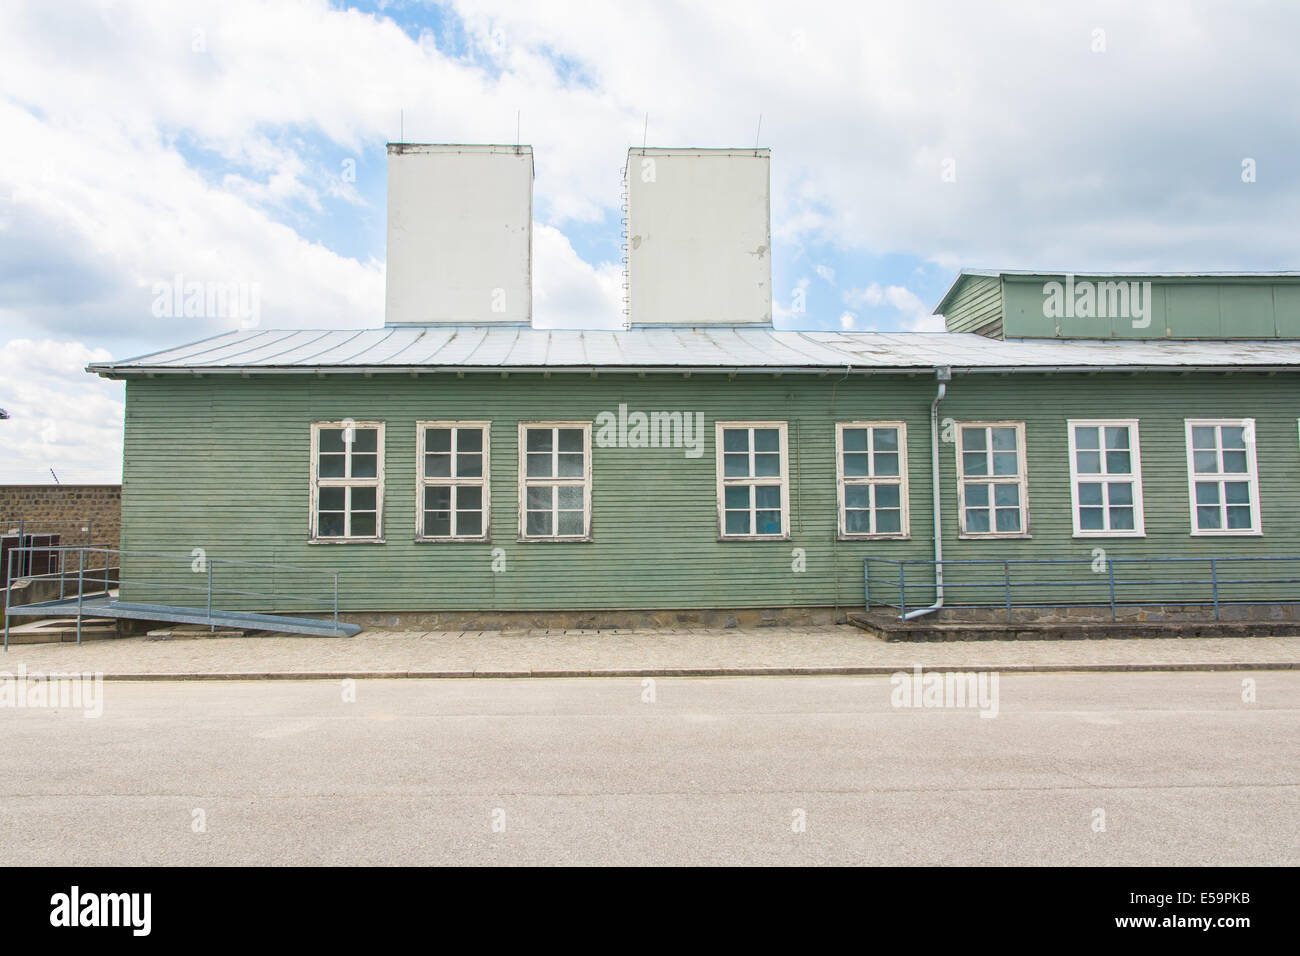 mauthausen,Austria-May 10,2014:the prisoners' barracks seen from inside the concentration camp of Mauthausen in Austria during a Stock Photo